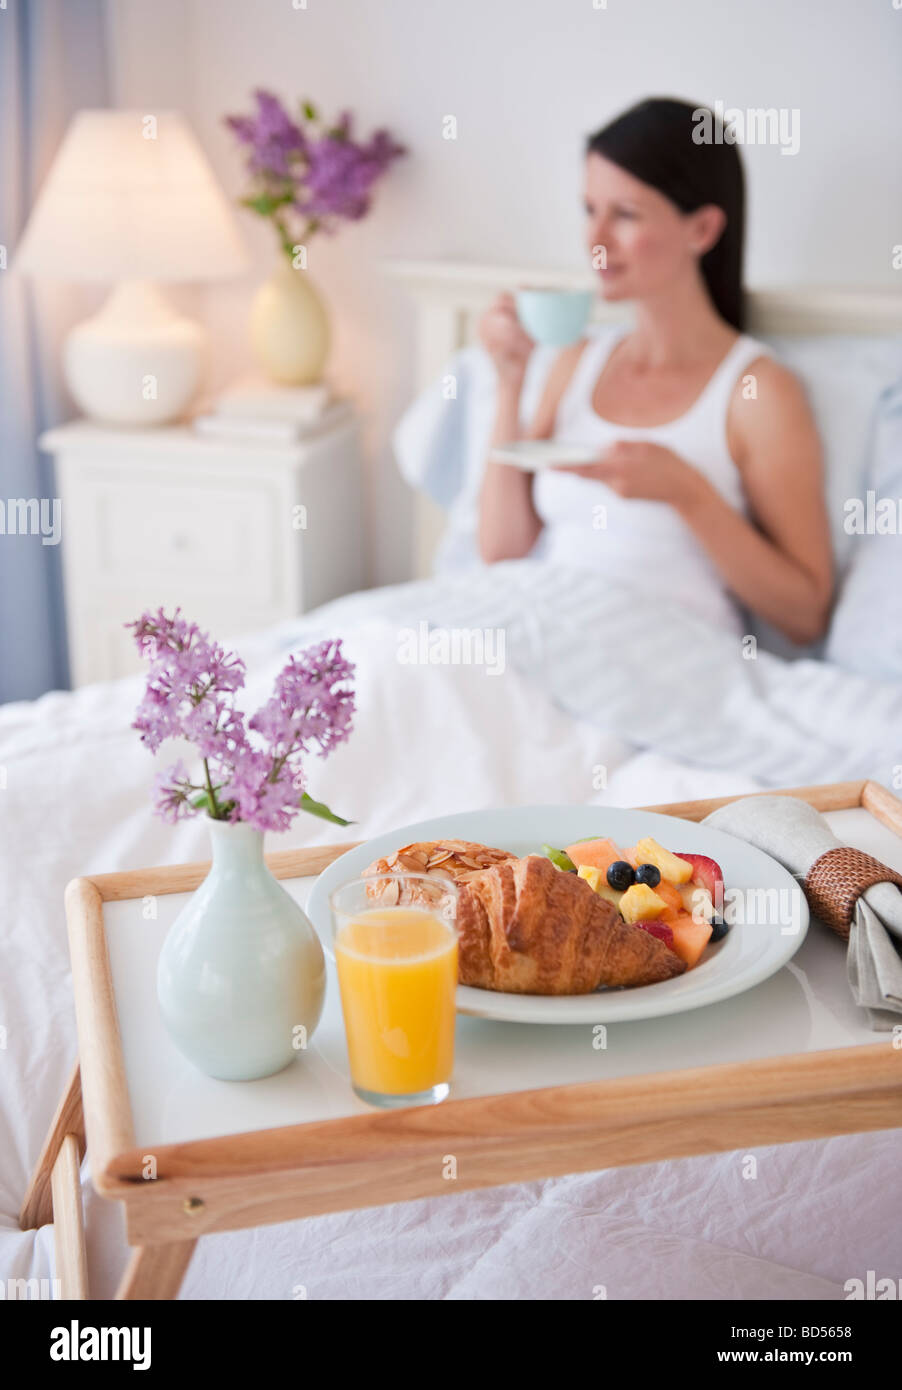 A man bringing a woman breakfast in bed Stock Photo